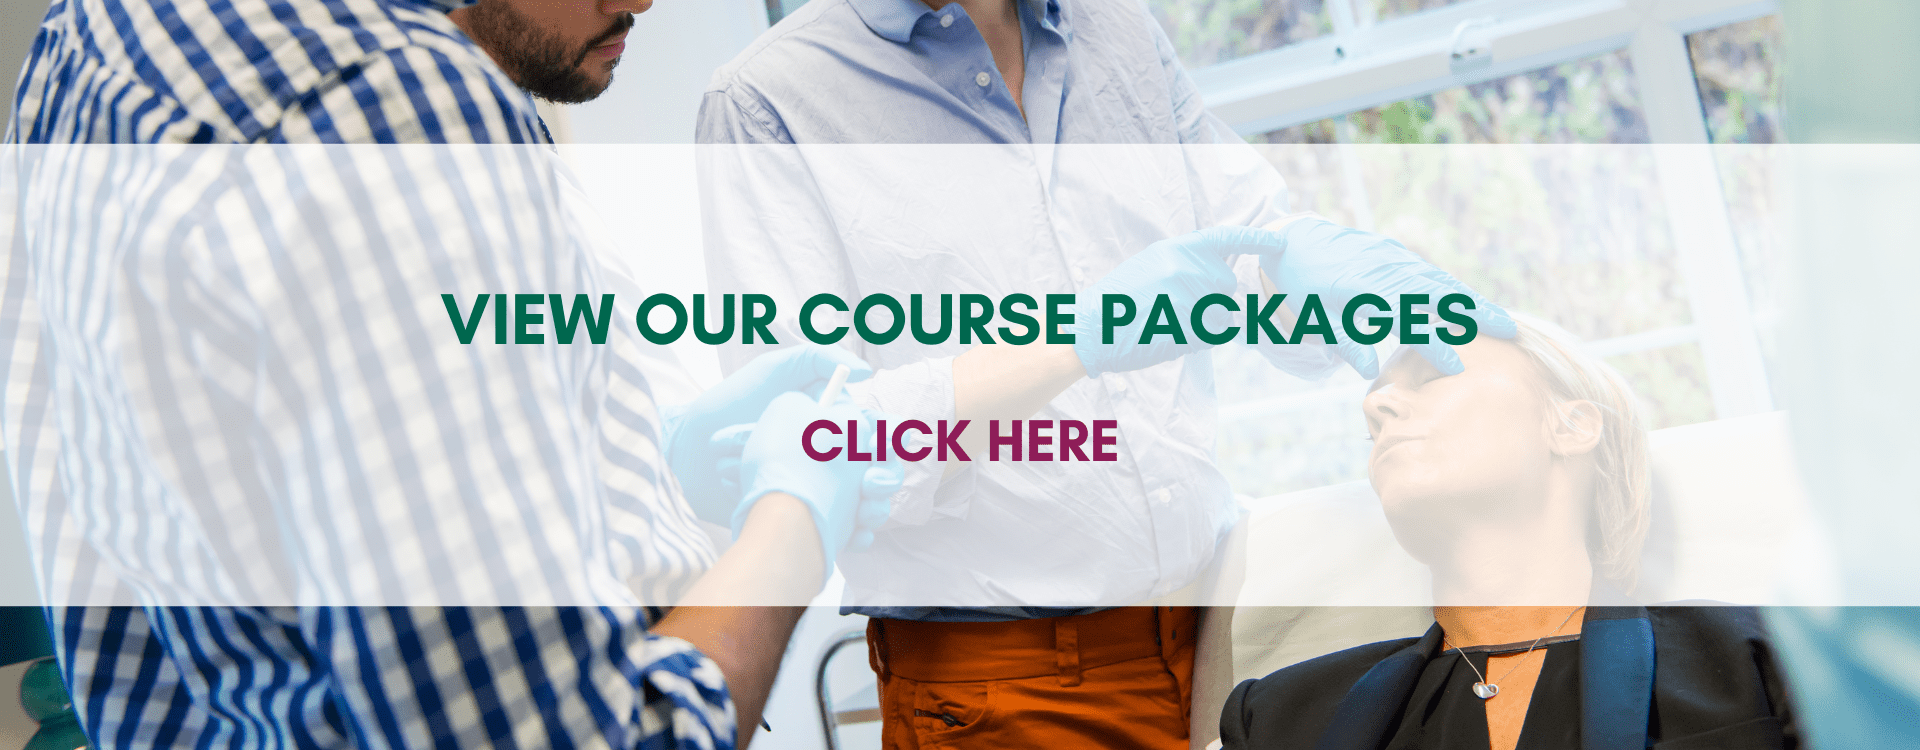 Course Packages - Mobile